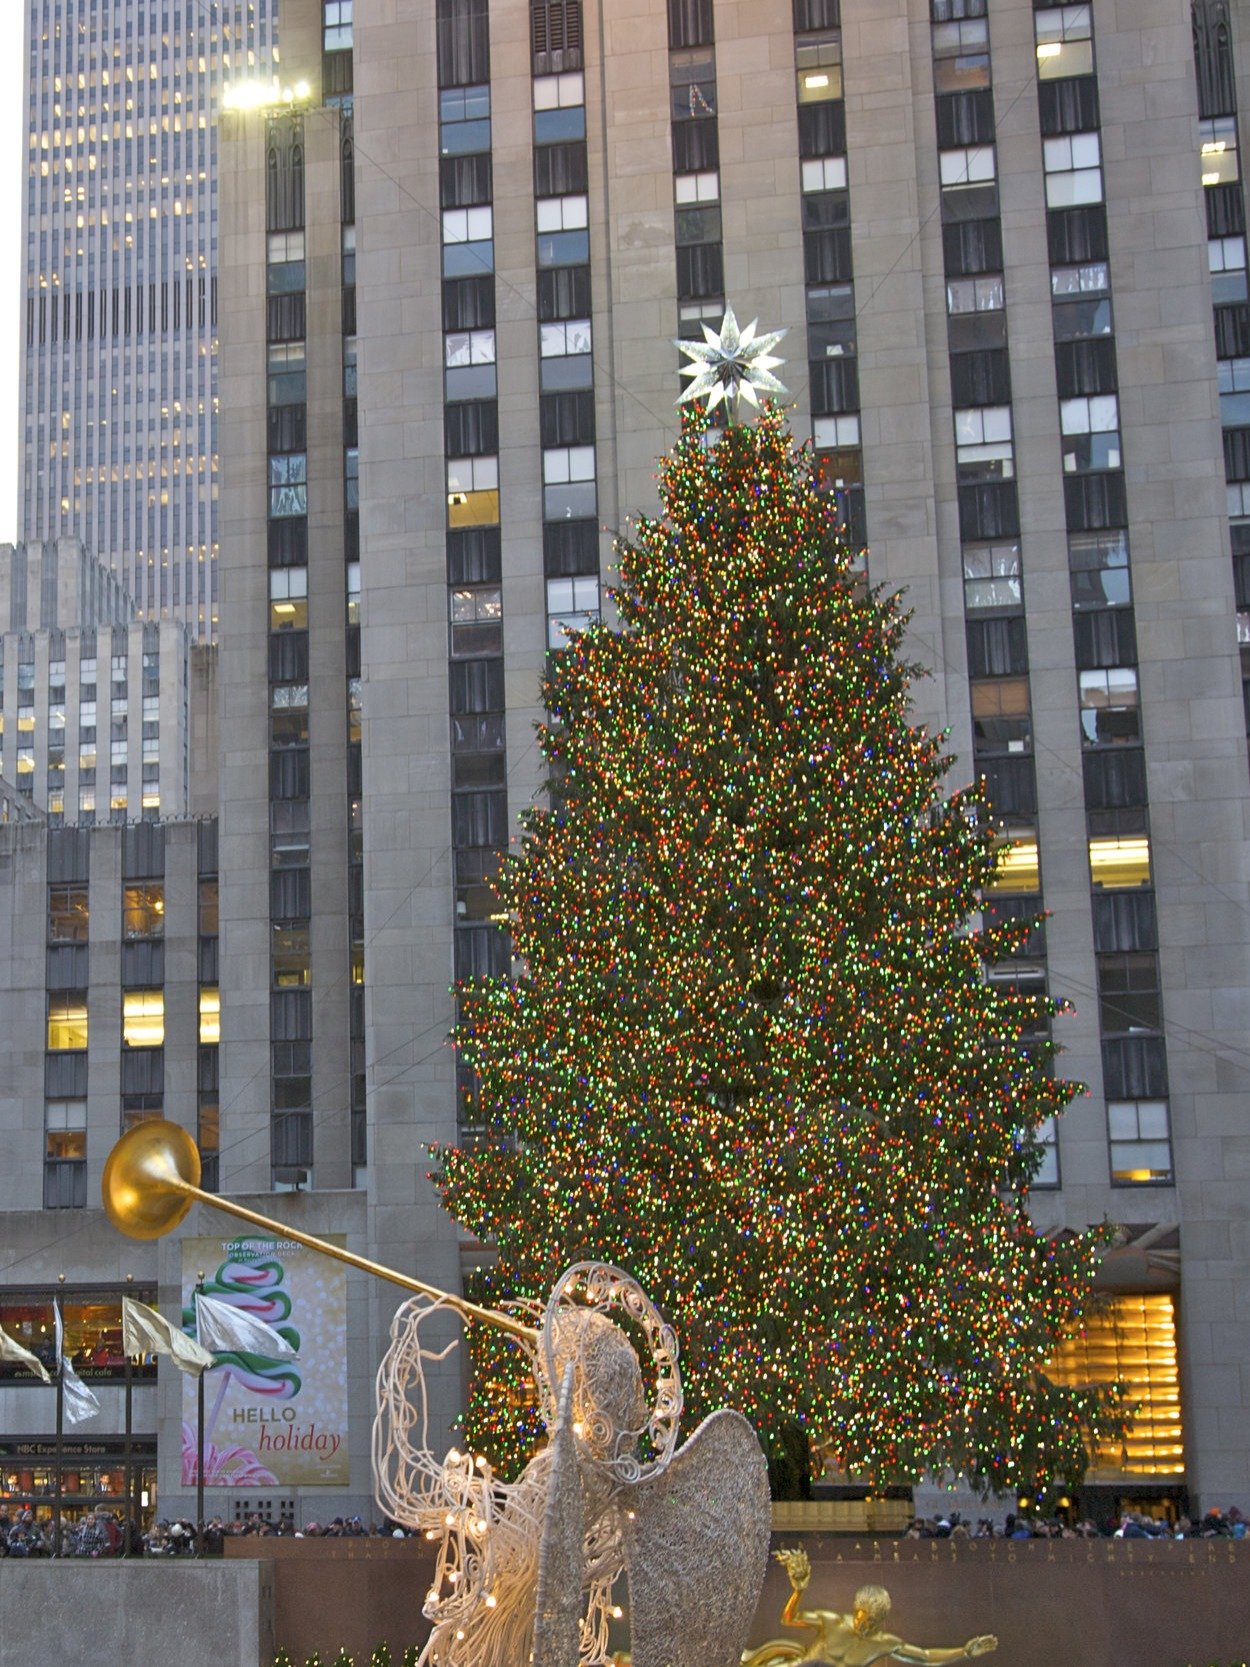 5 Fun Facts About the Rockefeller Christmas Tree